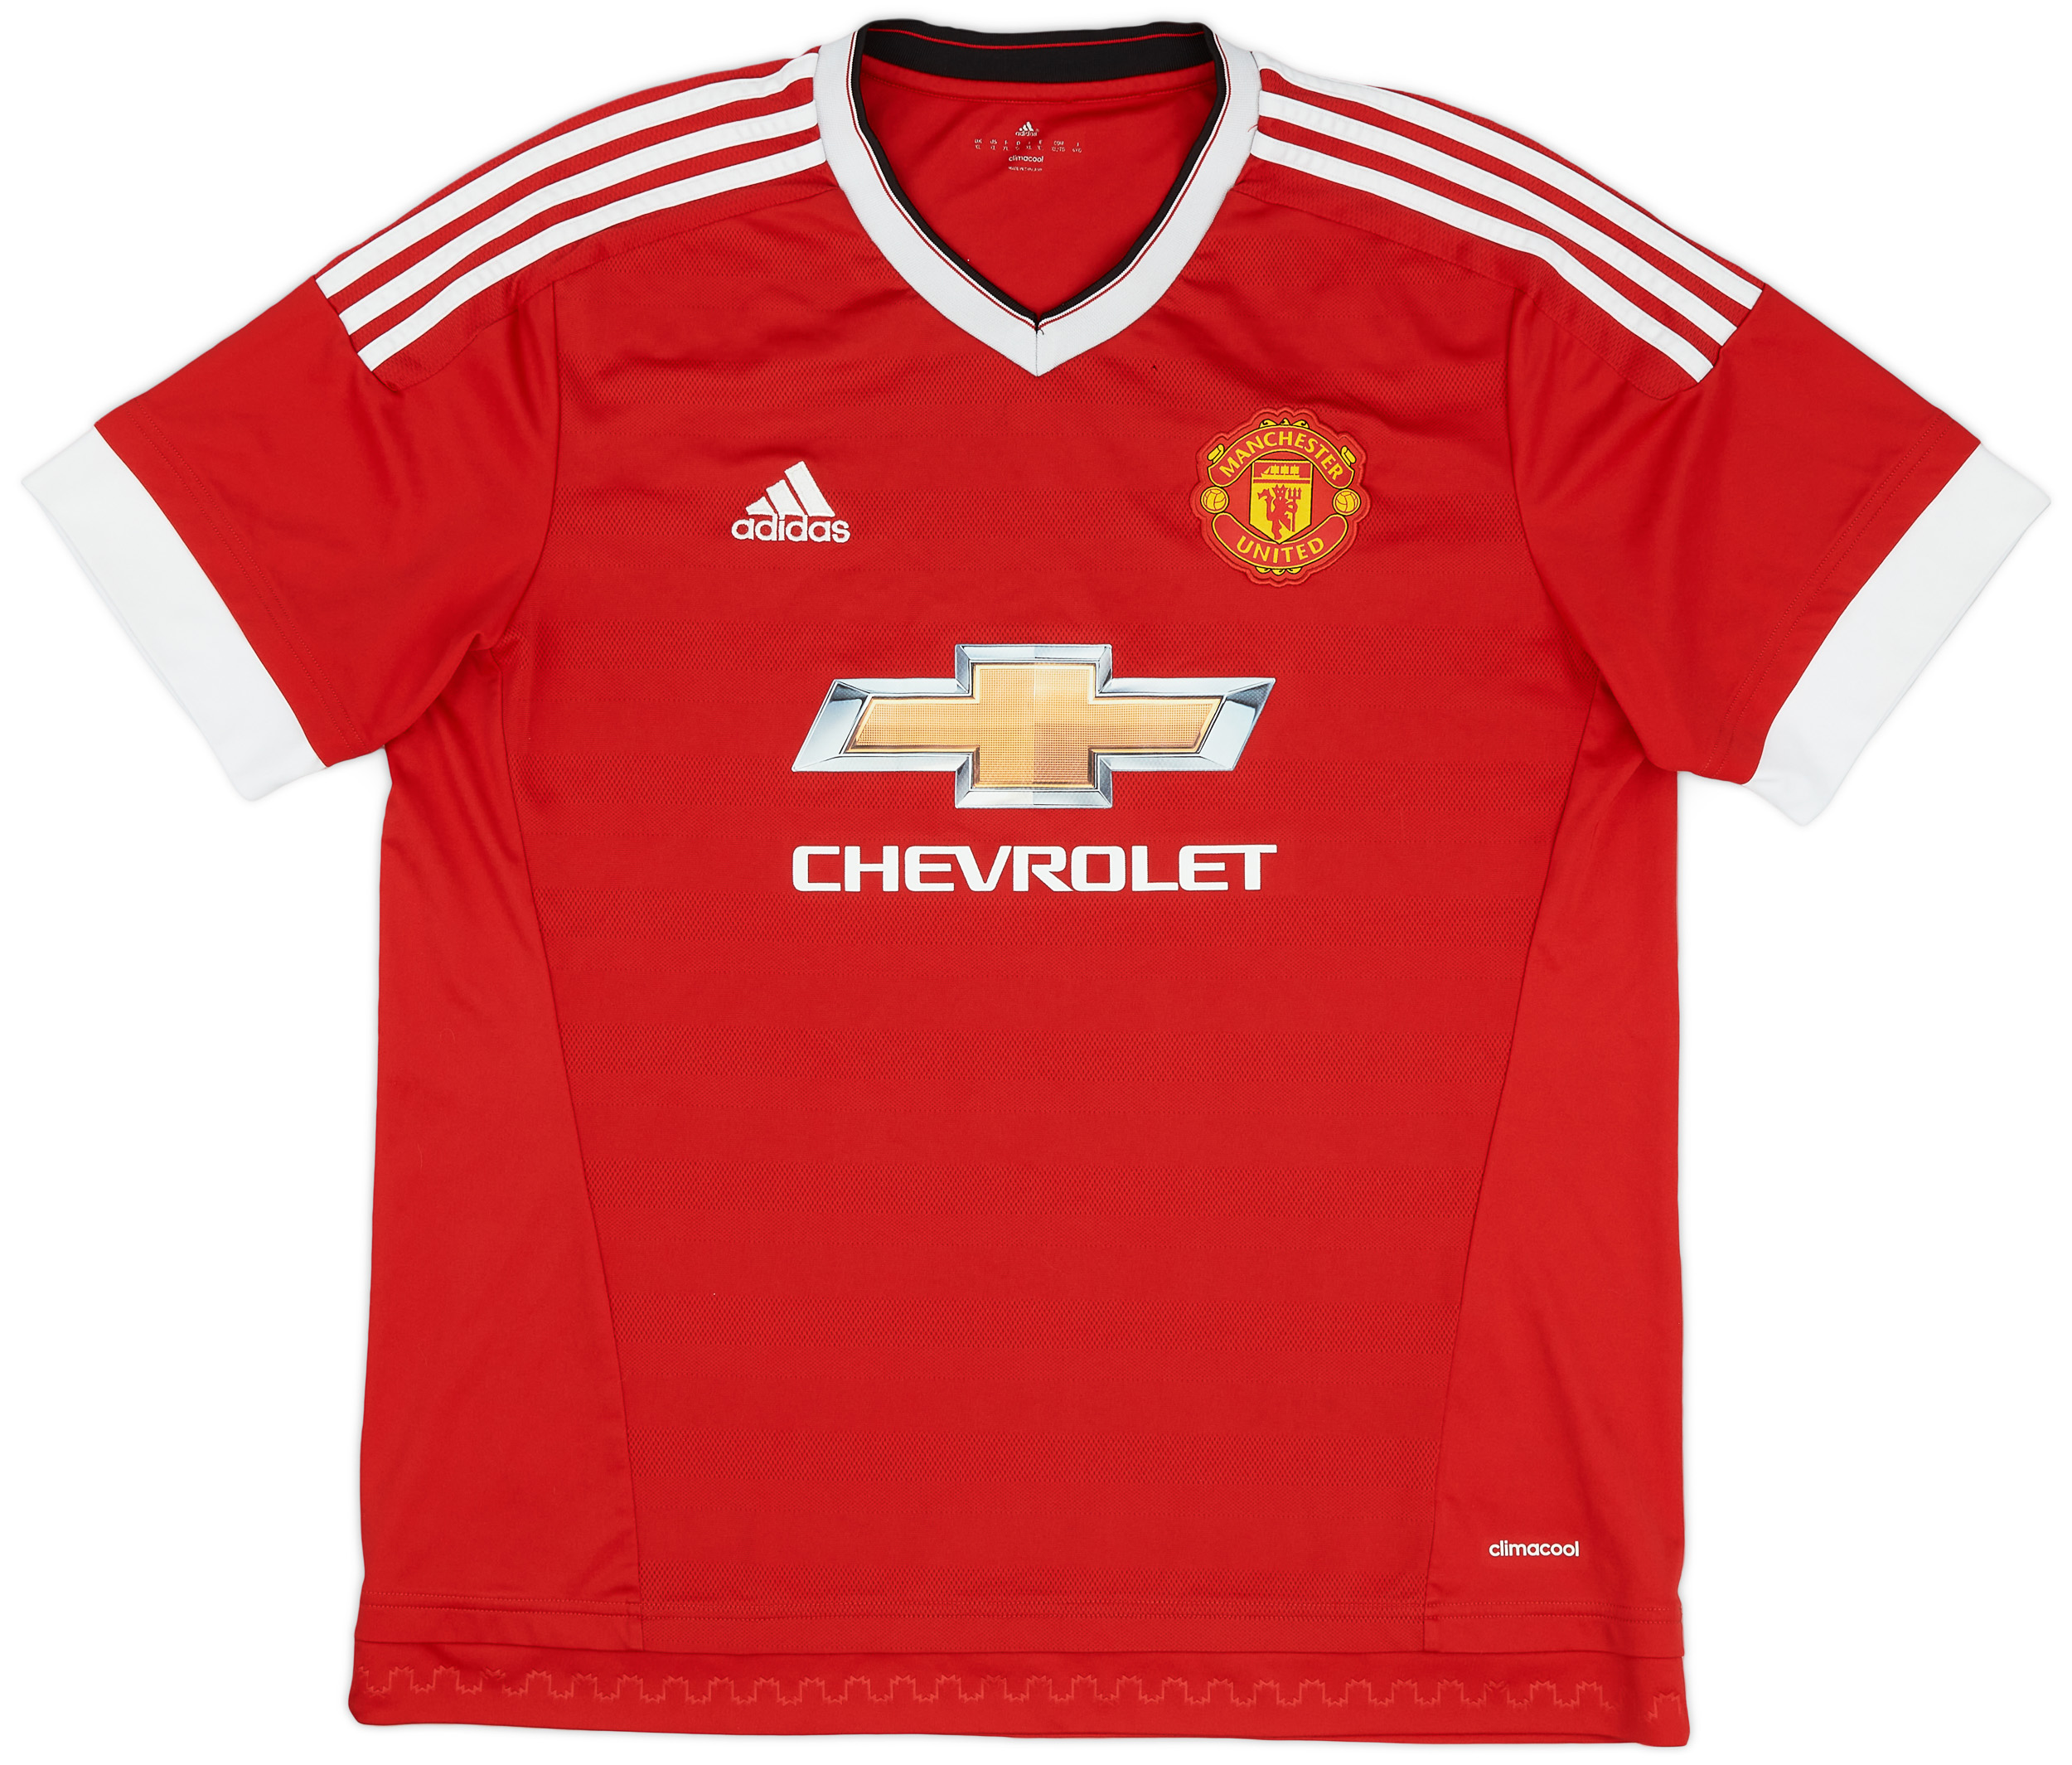 2015-16 Manchester United Home Shirt - 5/10 - ()